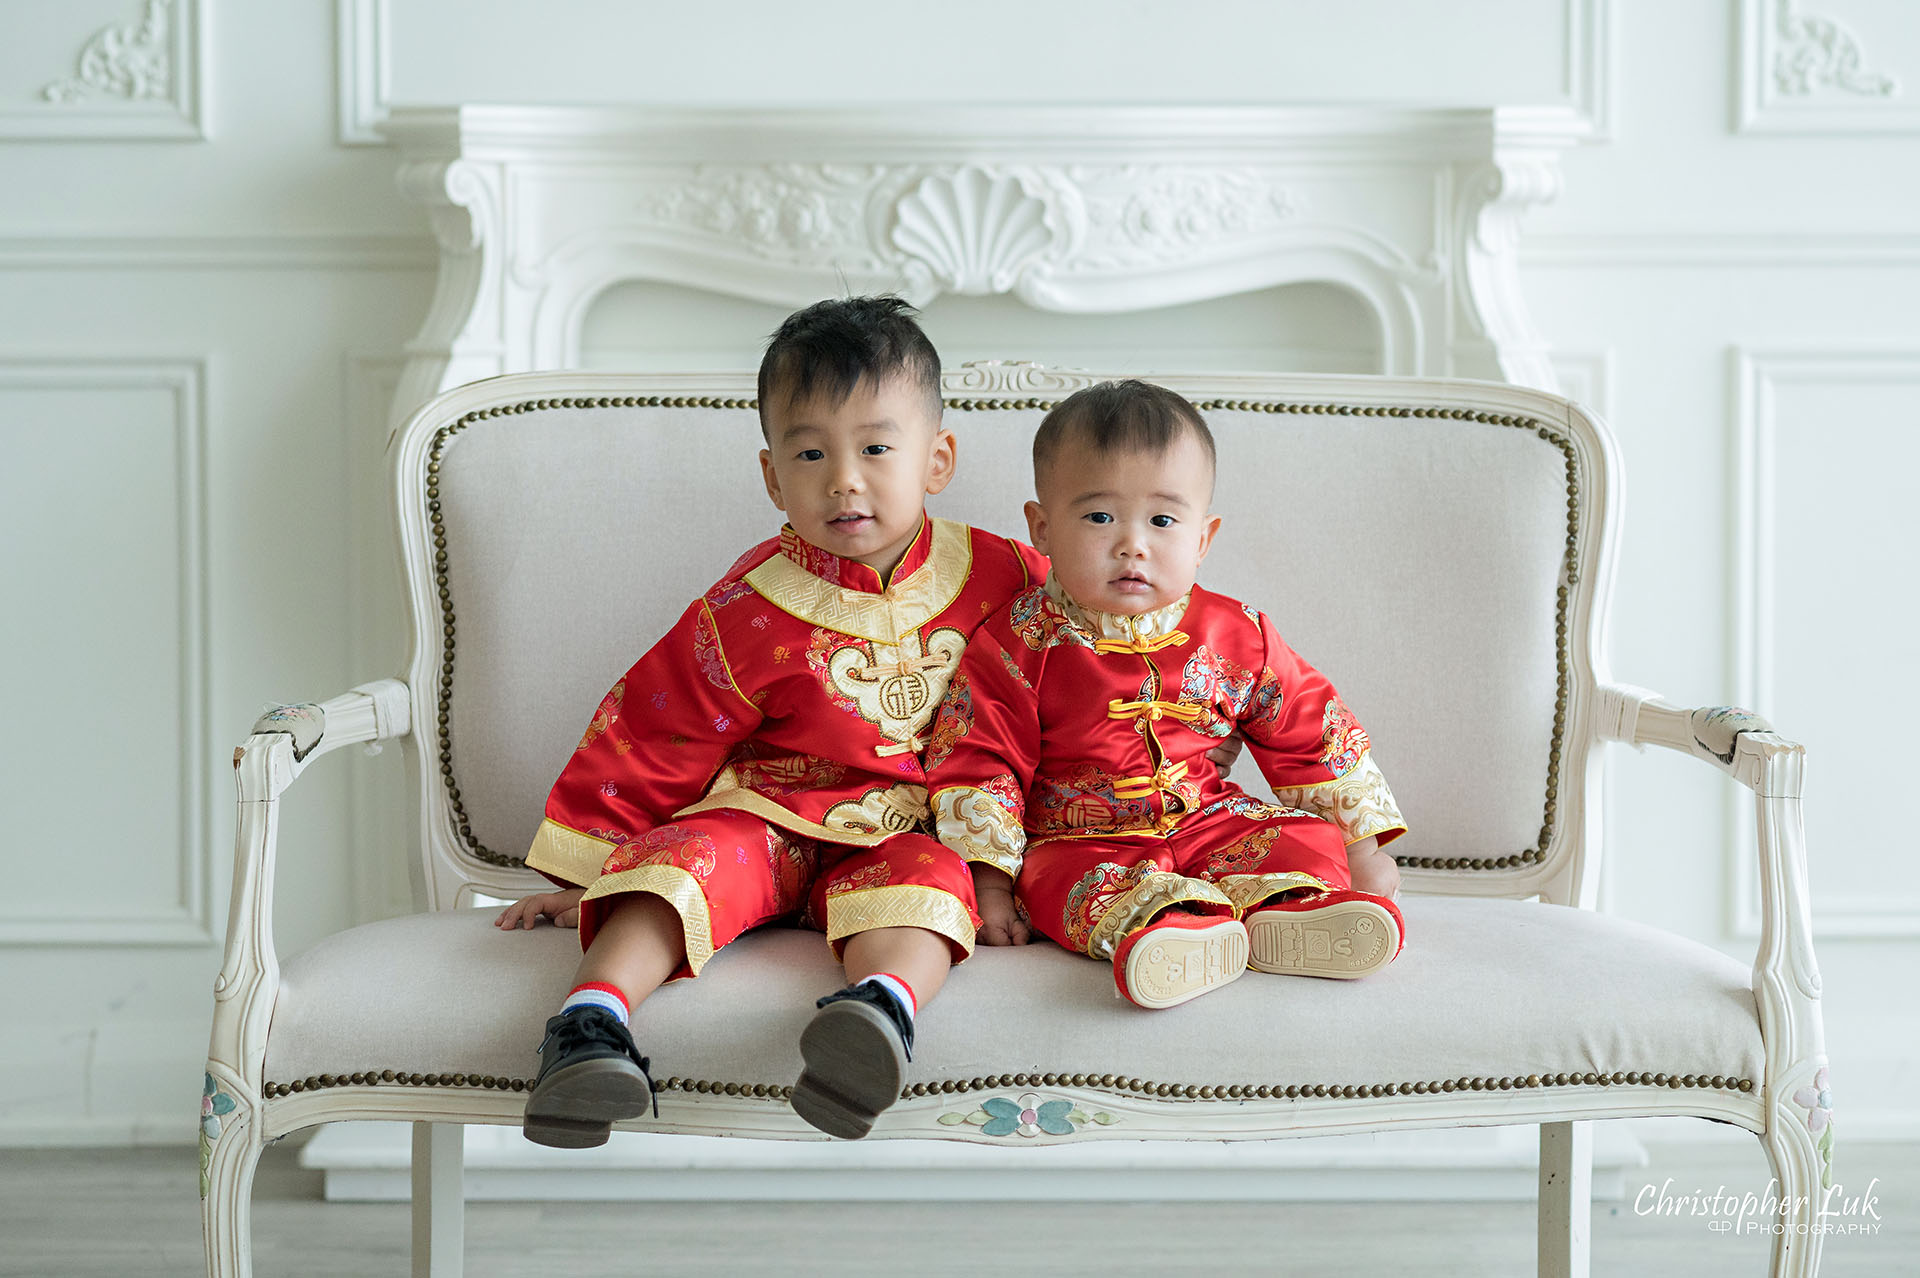 Grandchildren Grandsons Brothers Fun Adorable Cute Precious Seated Family Photos Traditional Chinese Clothing 